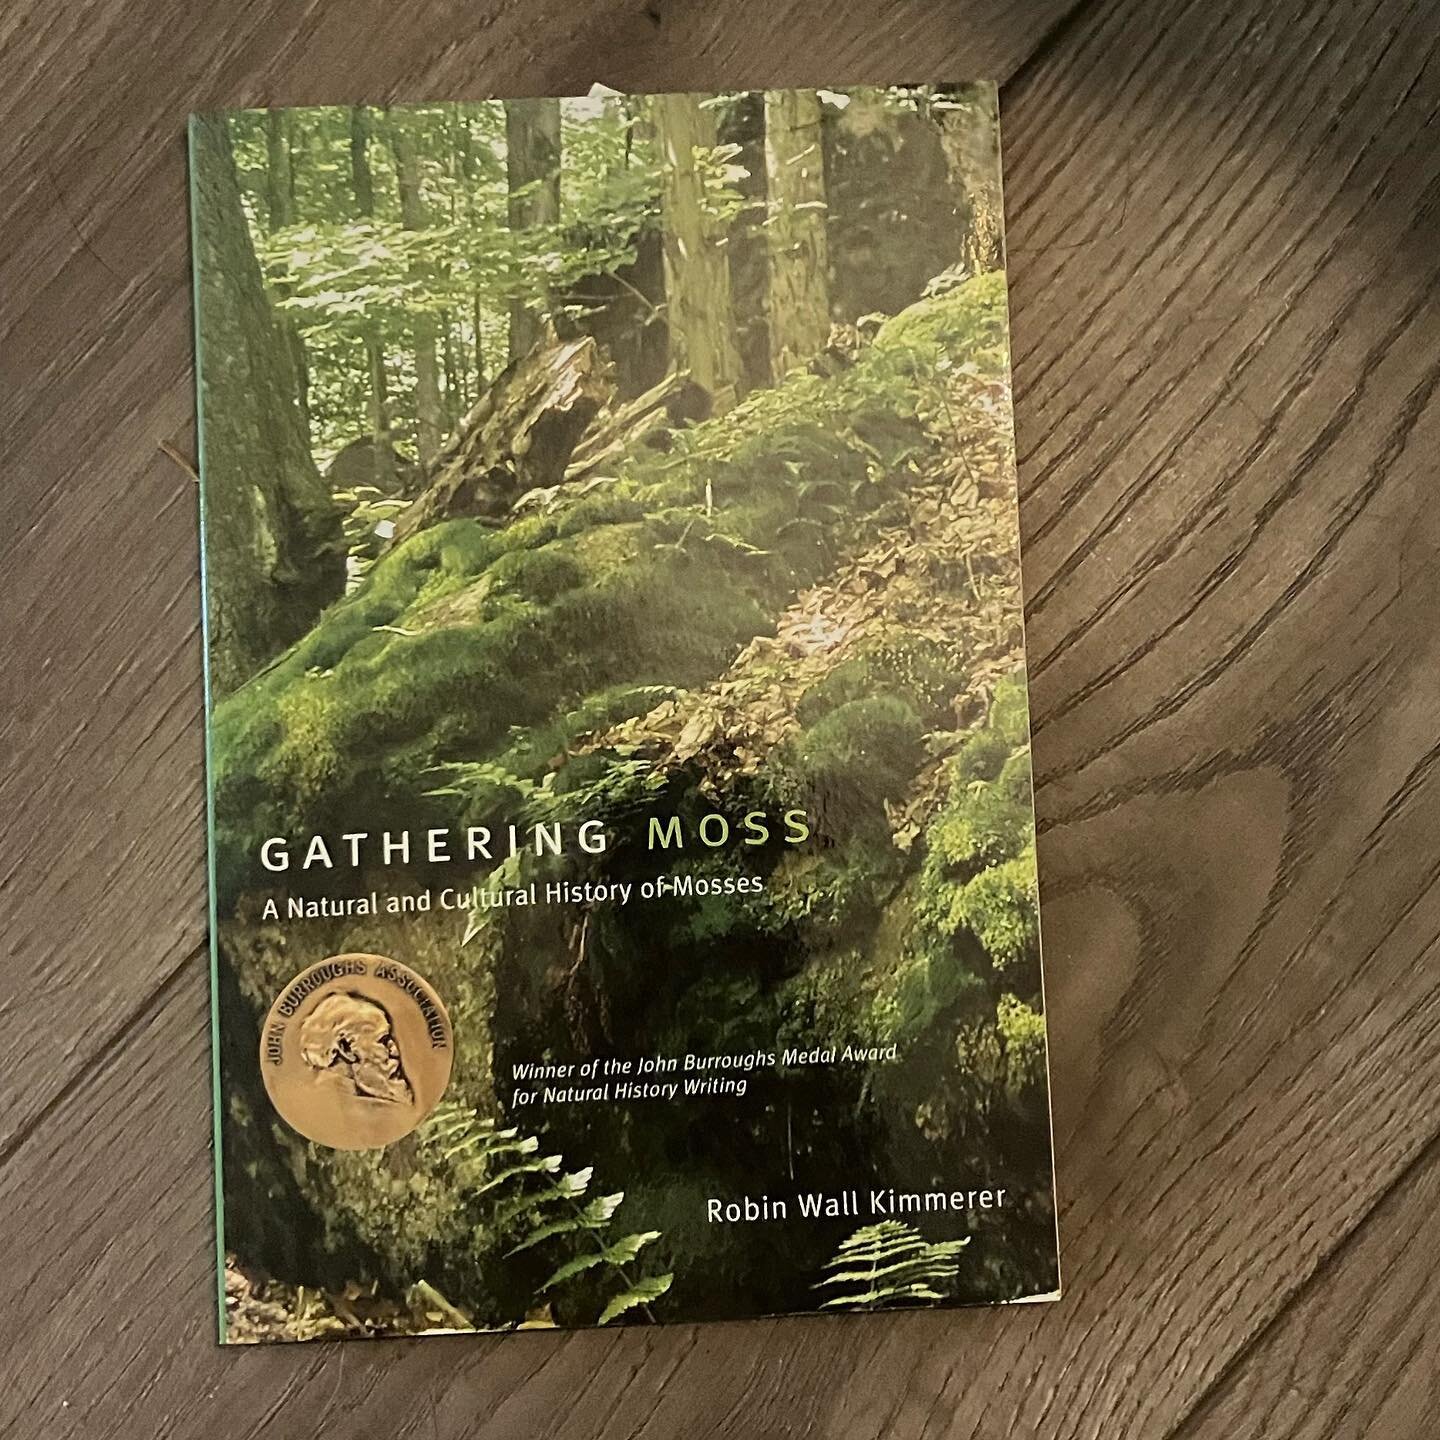 #robinwallkimmerer&rsquo;s other book Gathering Moss is a love story. 

#regenerativerelationships #earthmonth #earthmonth2023 #moss #bookstagram #nature